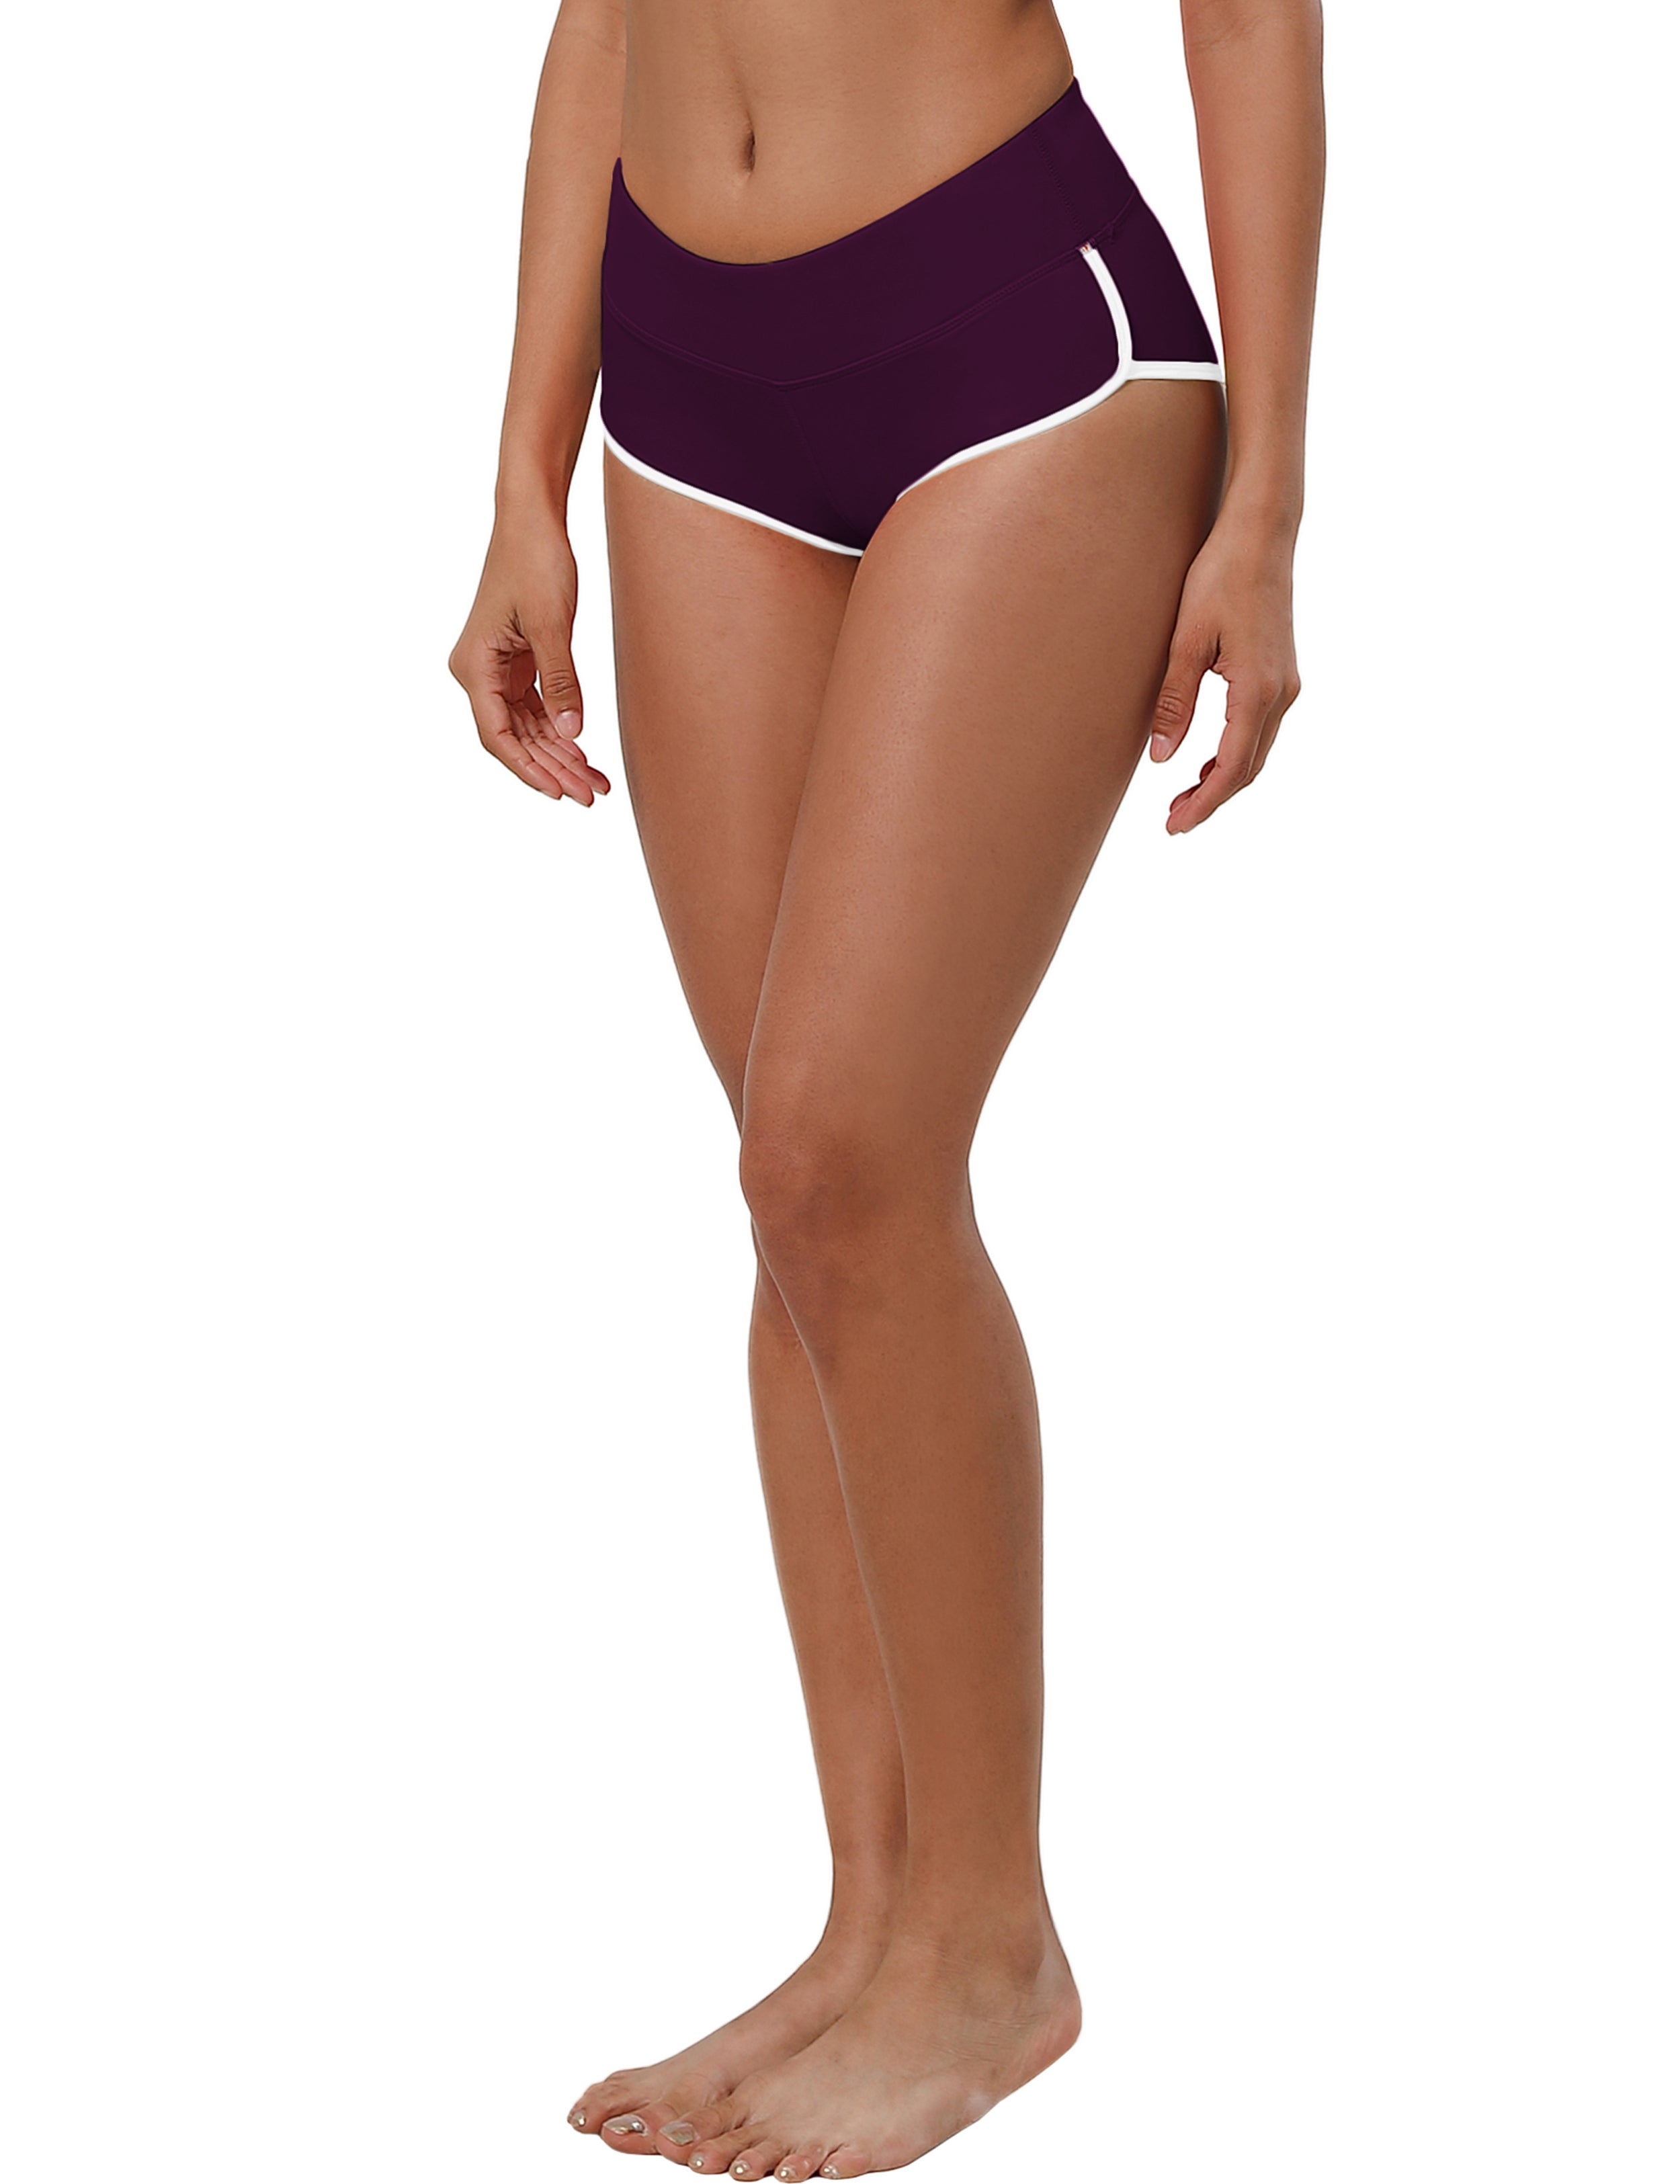 Sexy Booty Pilates Shorts plum Sleek, soft, smooth and totally comfortable: our newest sexy style is here. Softest-ever fabric High elasticity High density 4-way stretch Fabric doesn't attract lint easily No see-through Moisture-wicking Machine wash 75%Nylon/25%Spandex